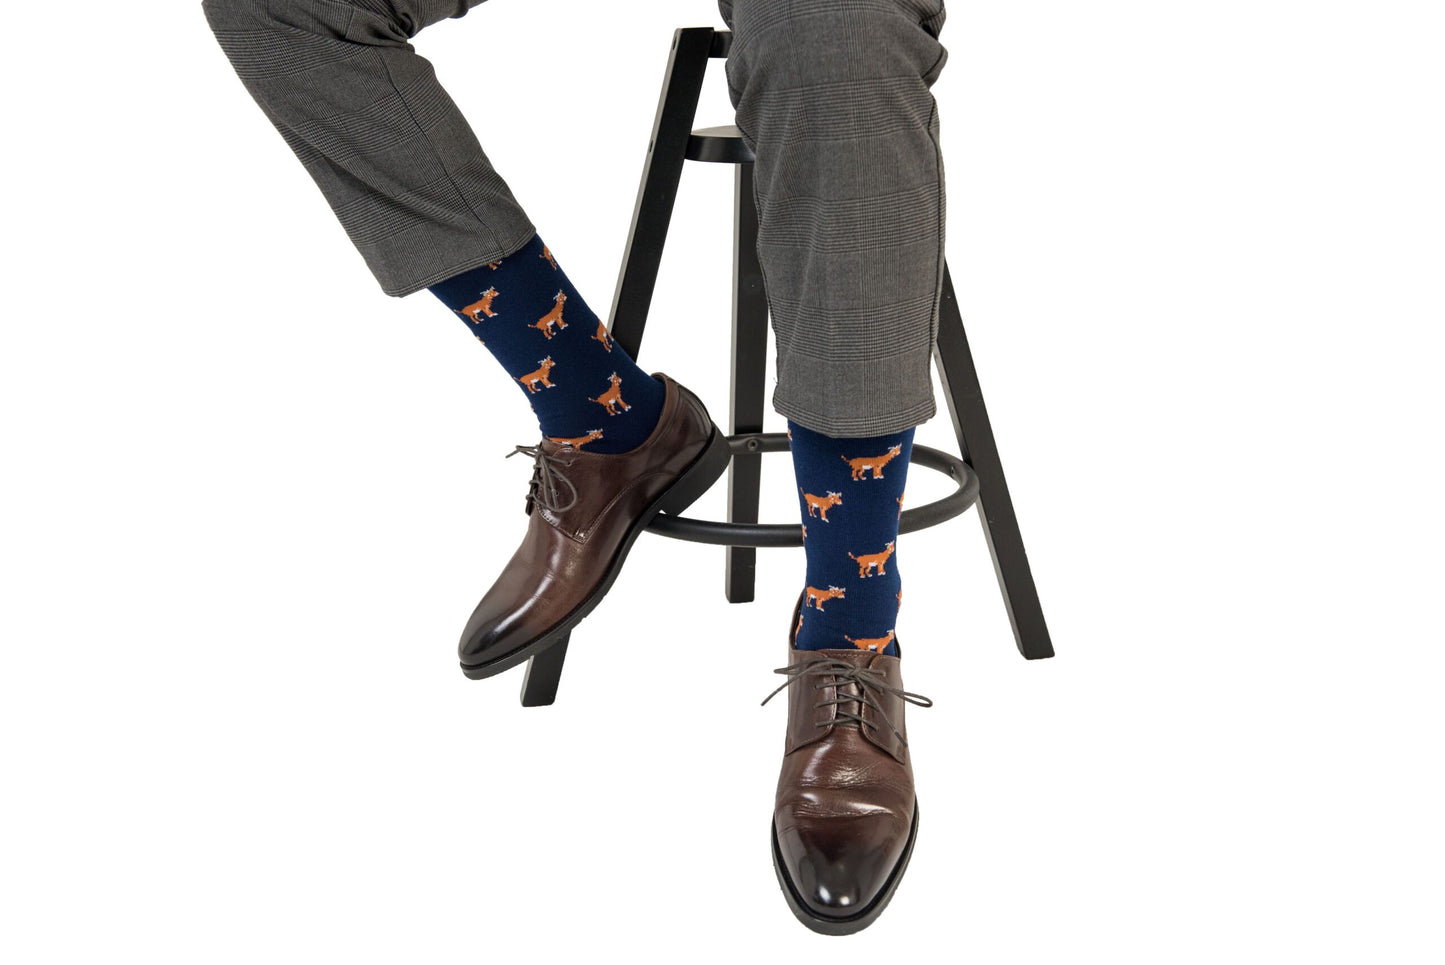 A man sitting on a stool wearing a pair of Goat Socks with foxes on them.